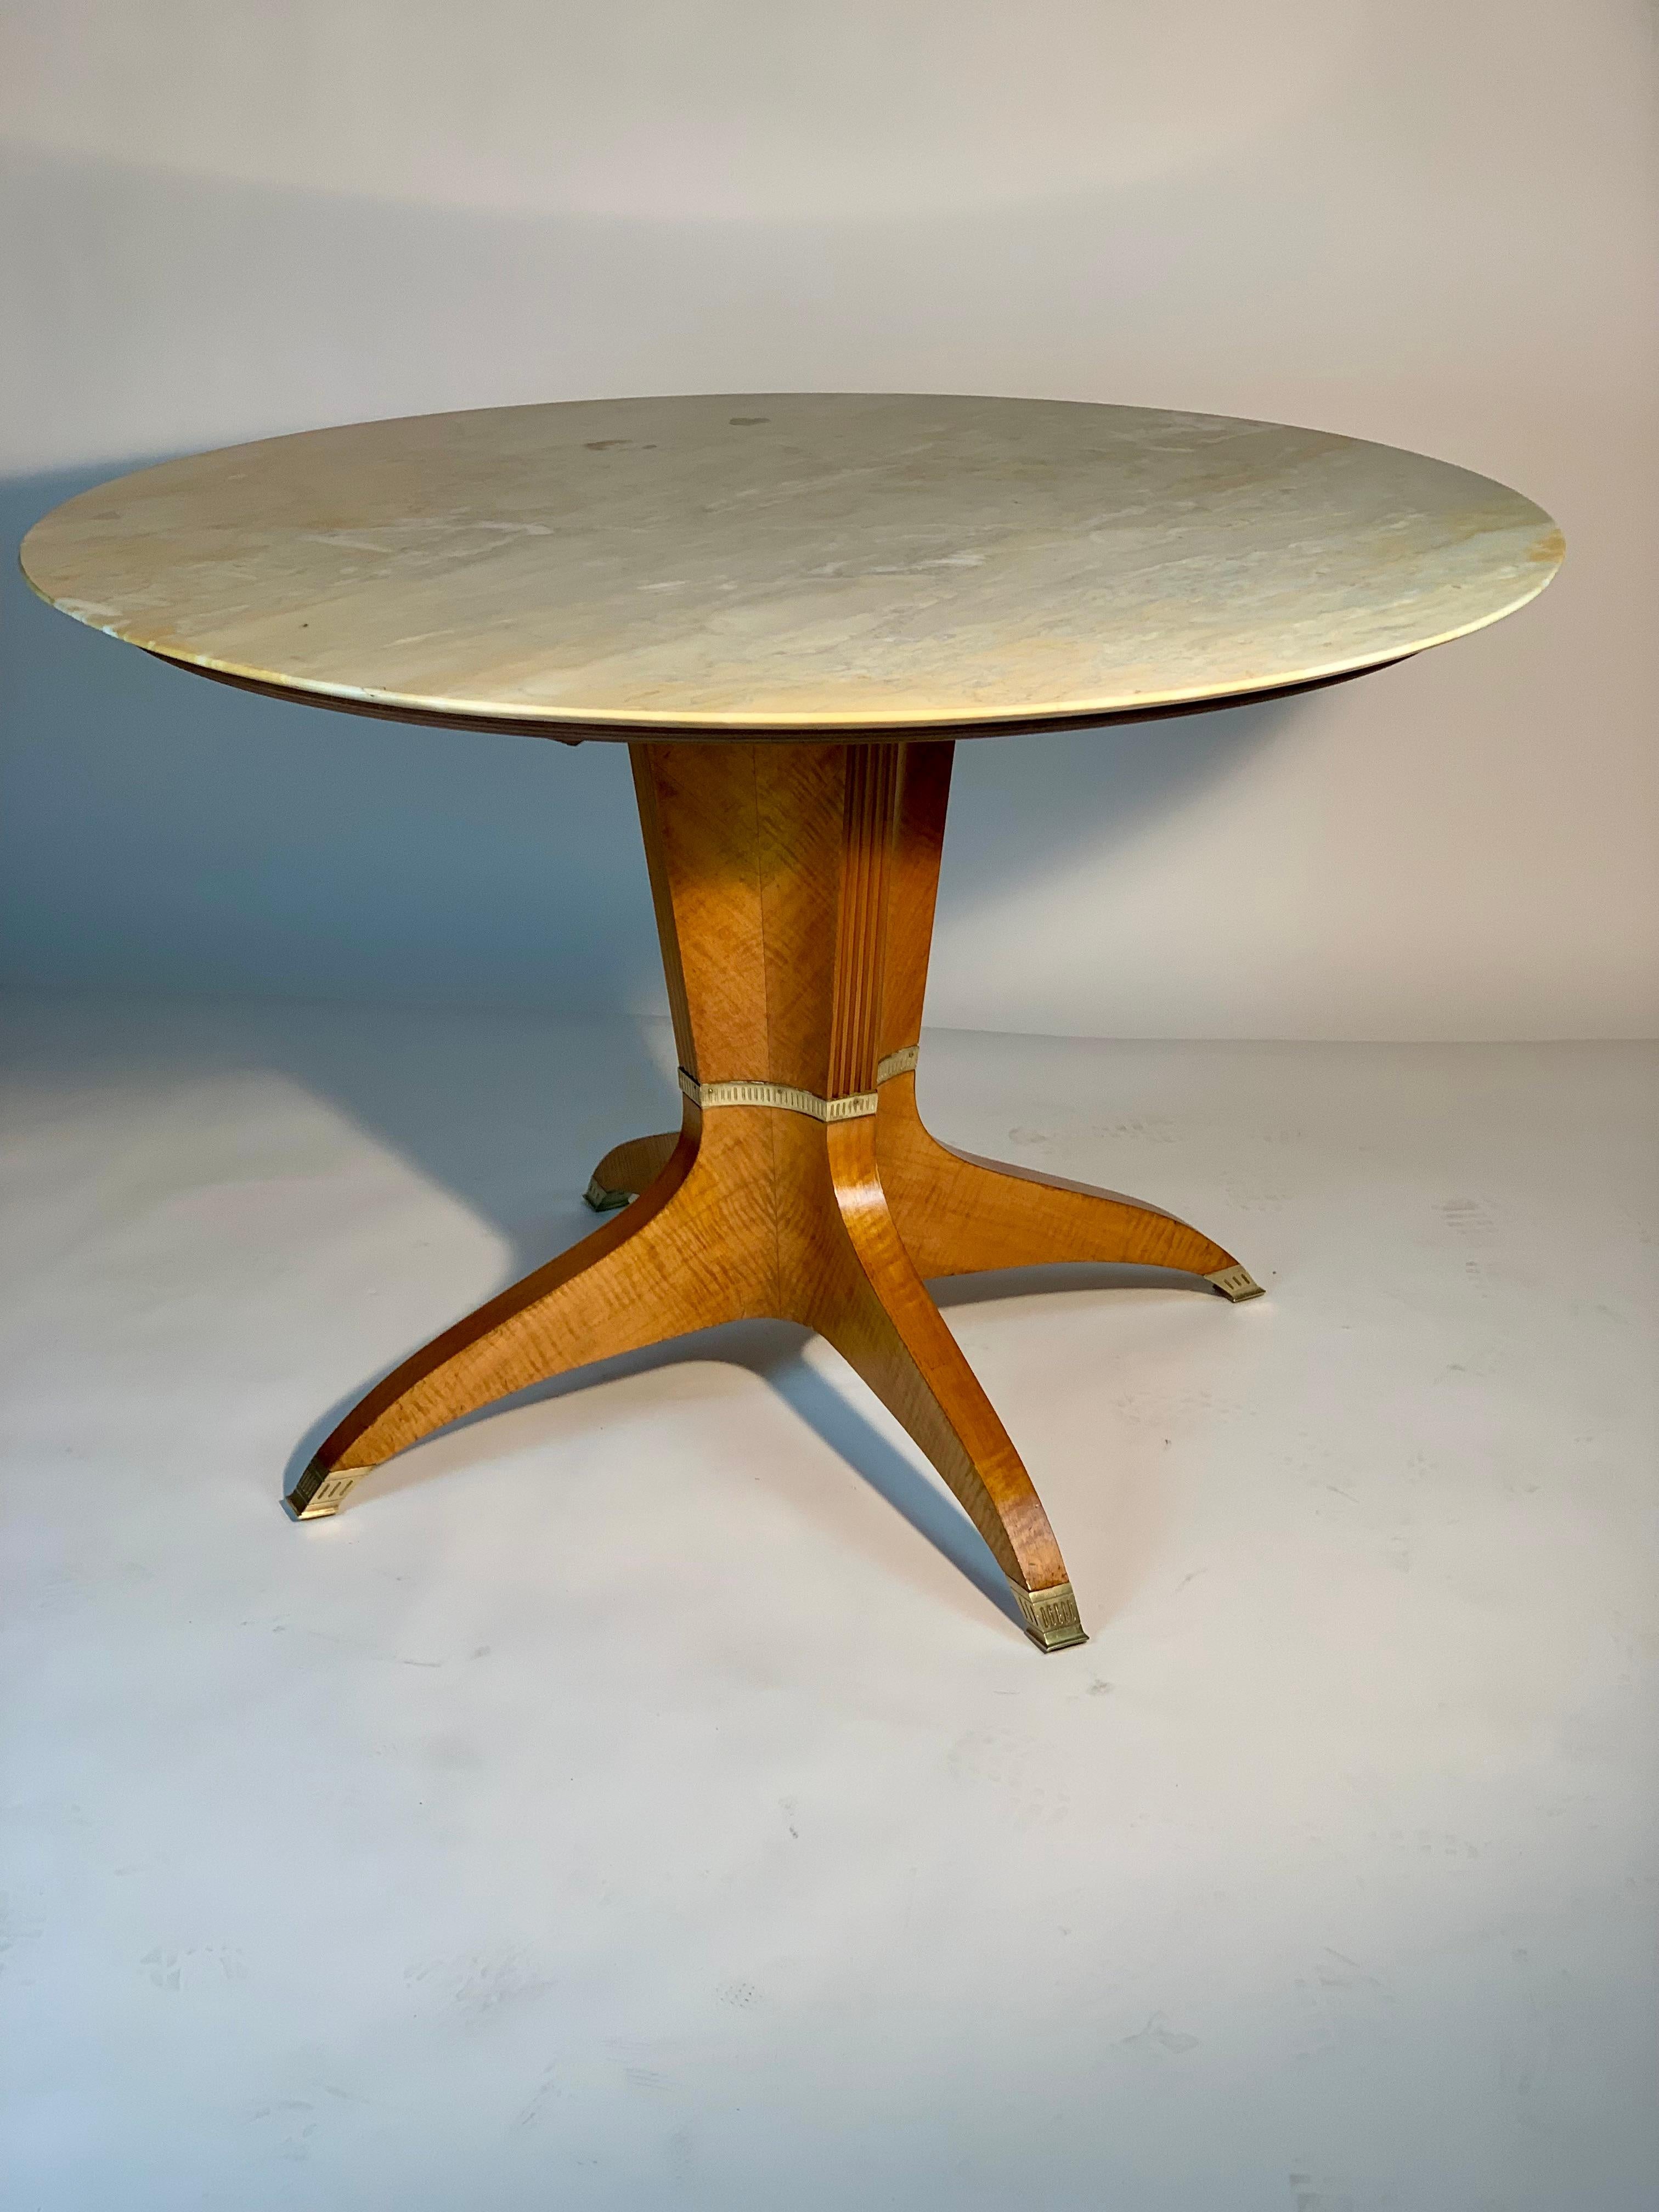 Mid-20th Century Mid-Century Italian Round Table Marble Top Brass Feet and Details